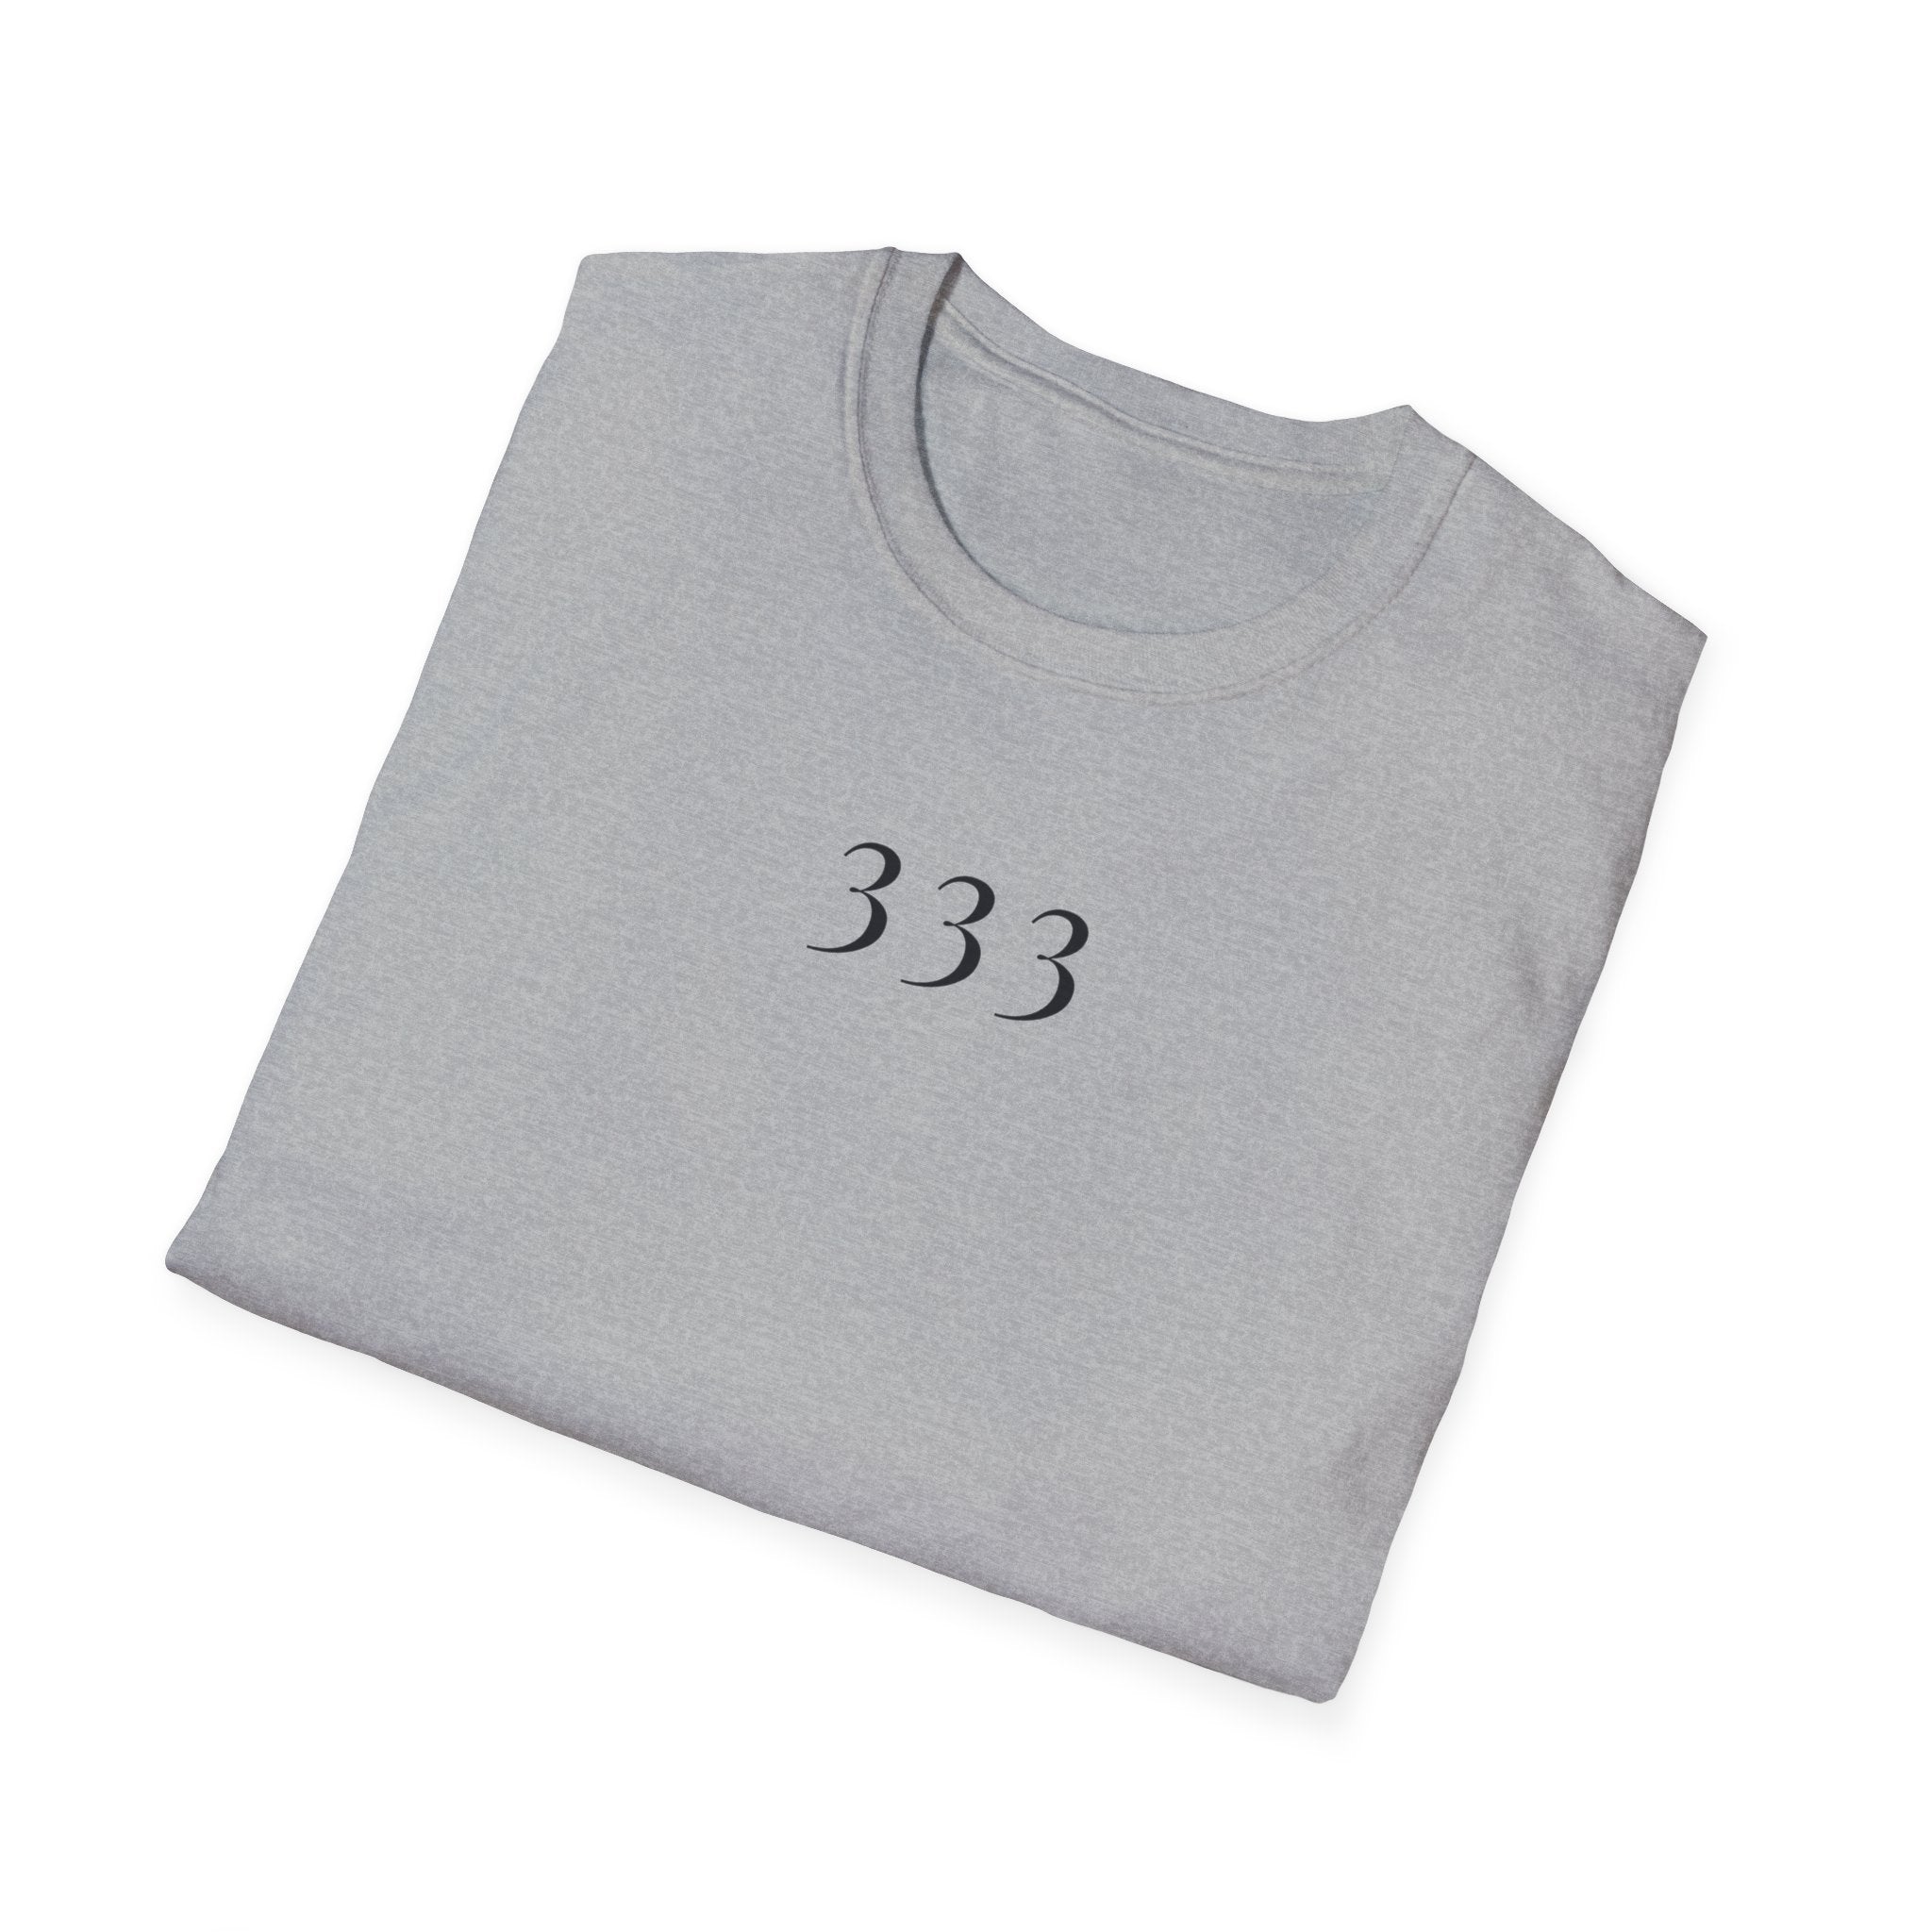 333 Angel Number Softstyle T-Shirt